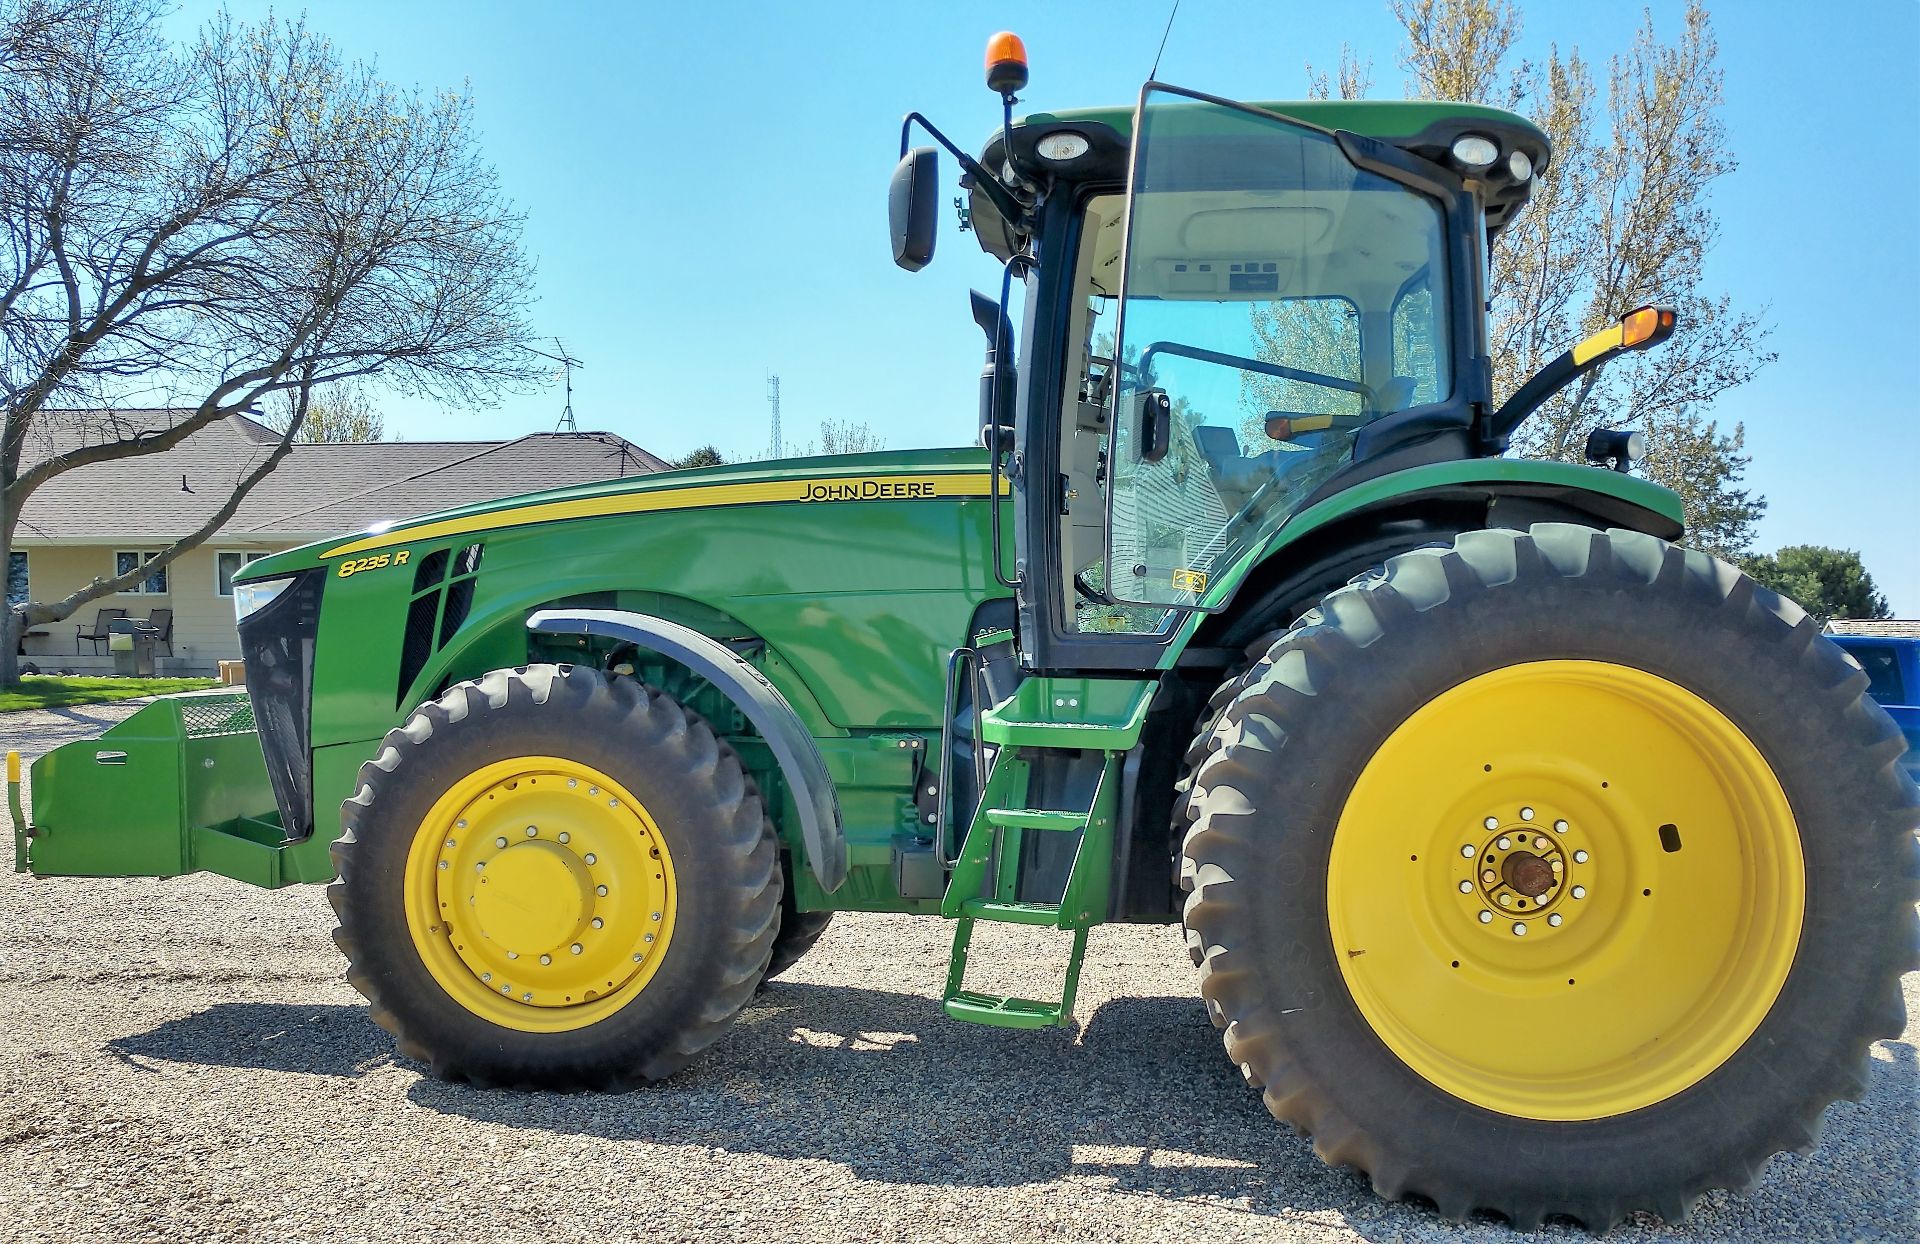 2013 JD 8235R MFWD 235 HP Tractor with power shift. Serial #1RW8235RPDP074834 with 800 hours.